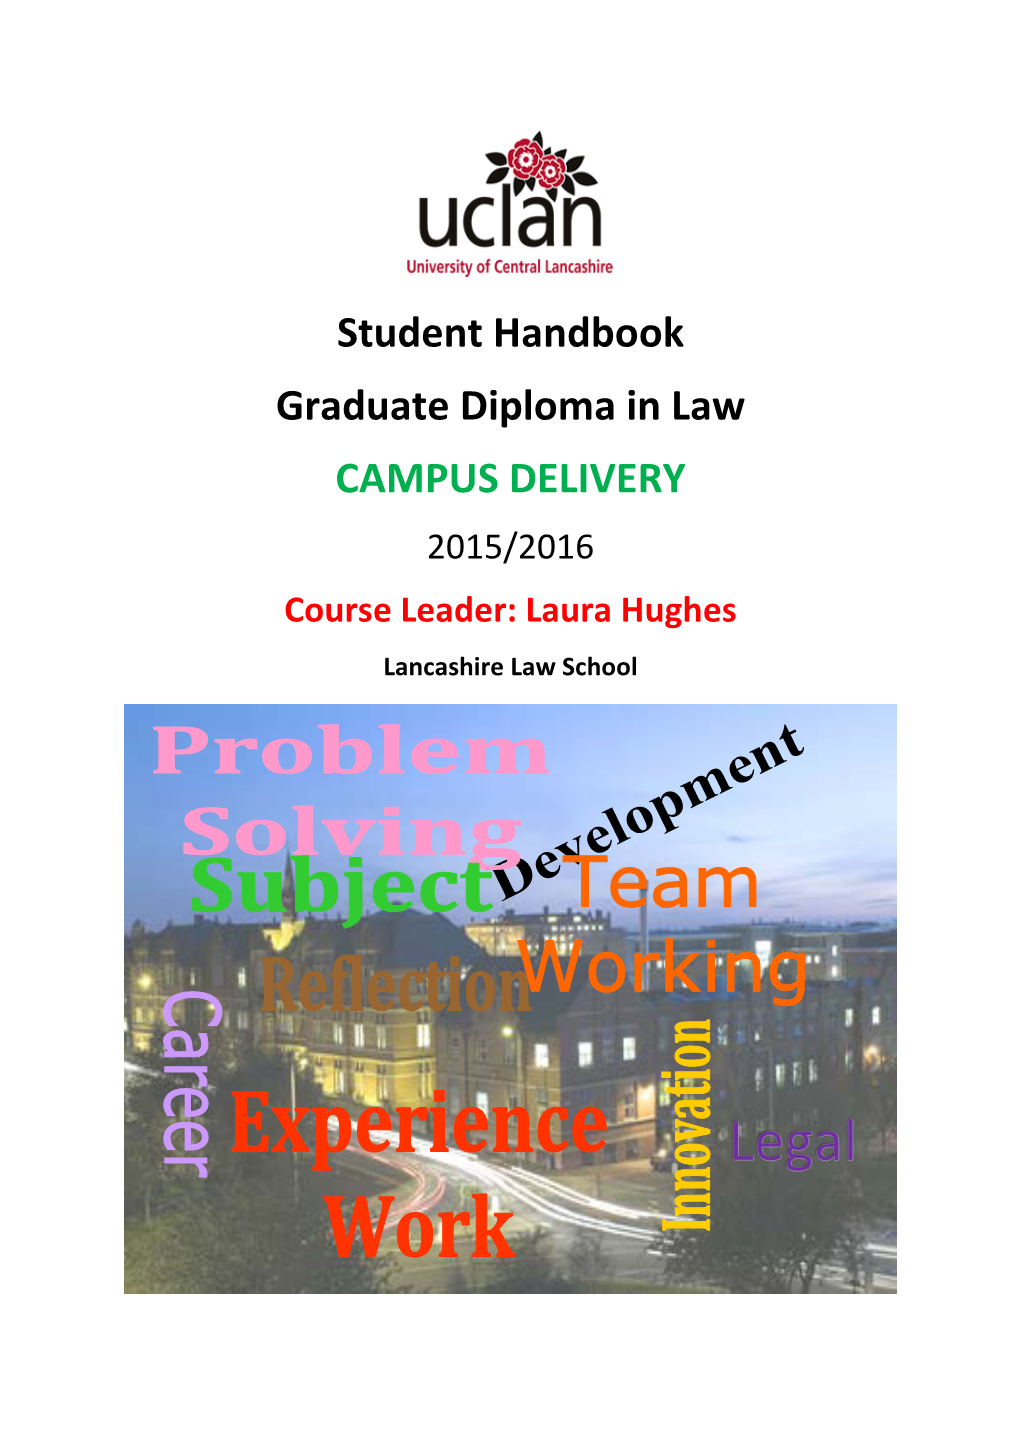 Student Handbook Graduate Diploma in Law CAMPUS DELIVERY 2015/2016 Course Leader: Laura Hughes